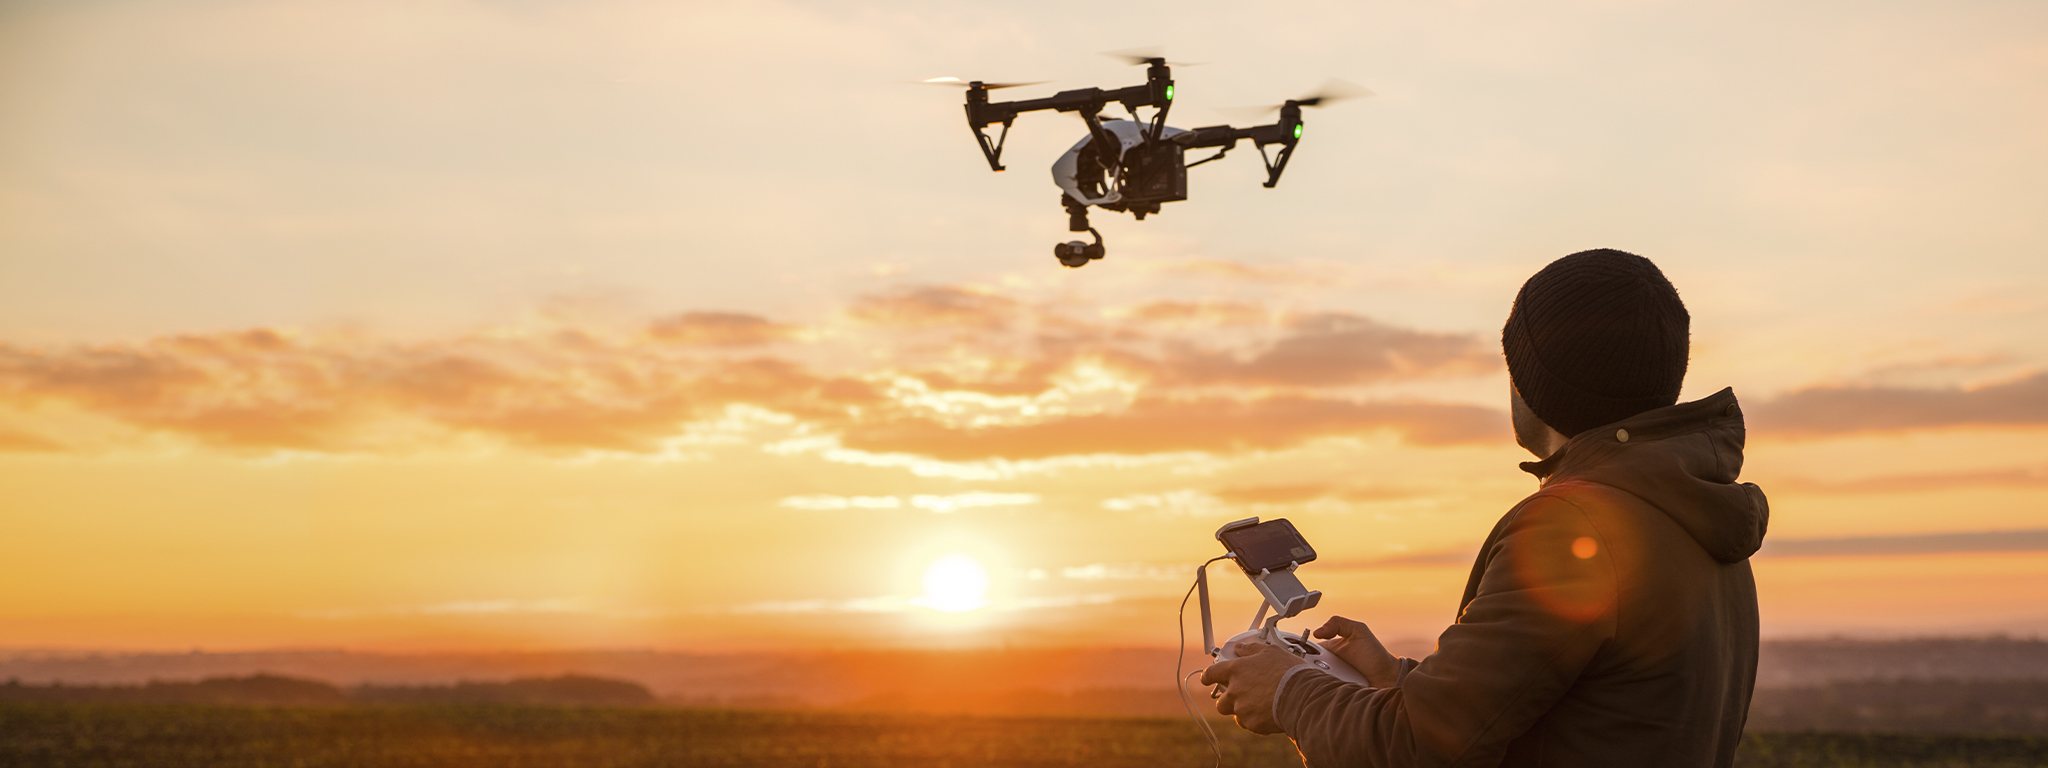 a man operating a drone with remote control at sunset